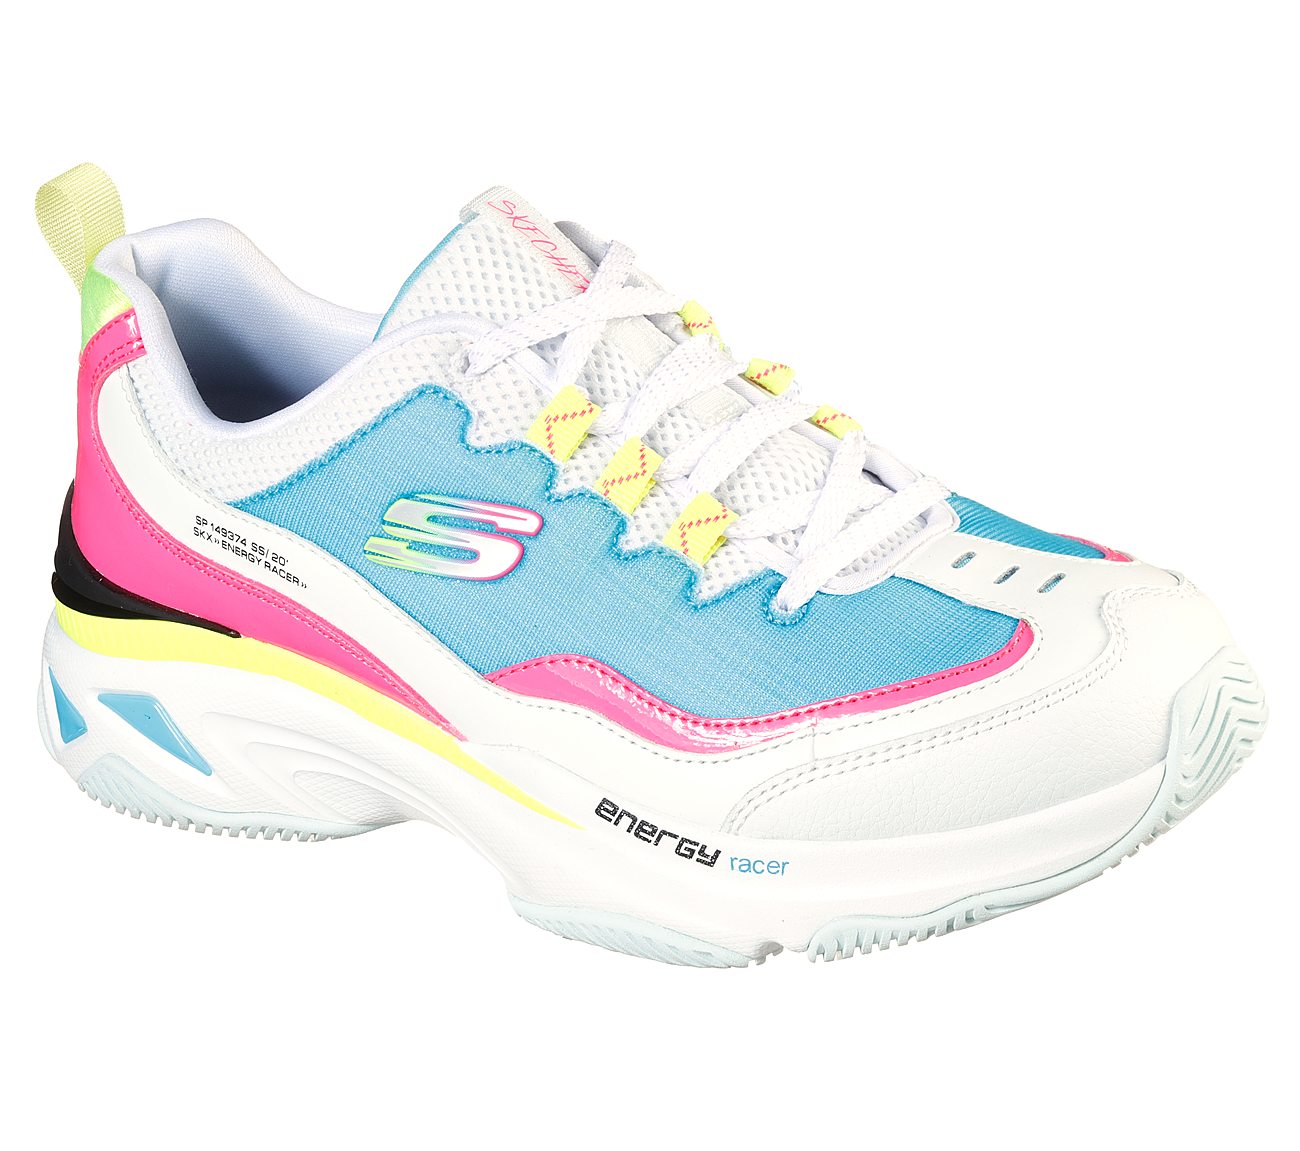 ENERGY RACER-SHE'S ICONIC, WHITE/BLUE/PINK Footwear Lateral View